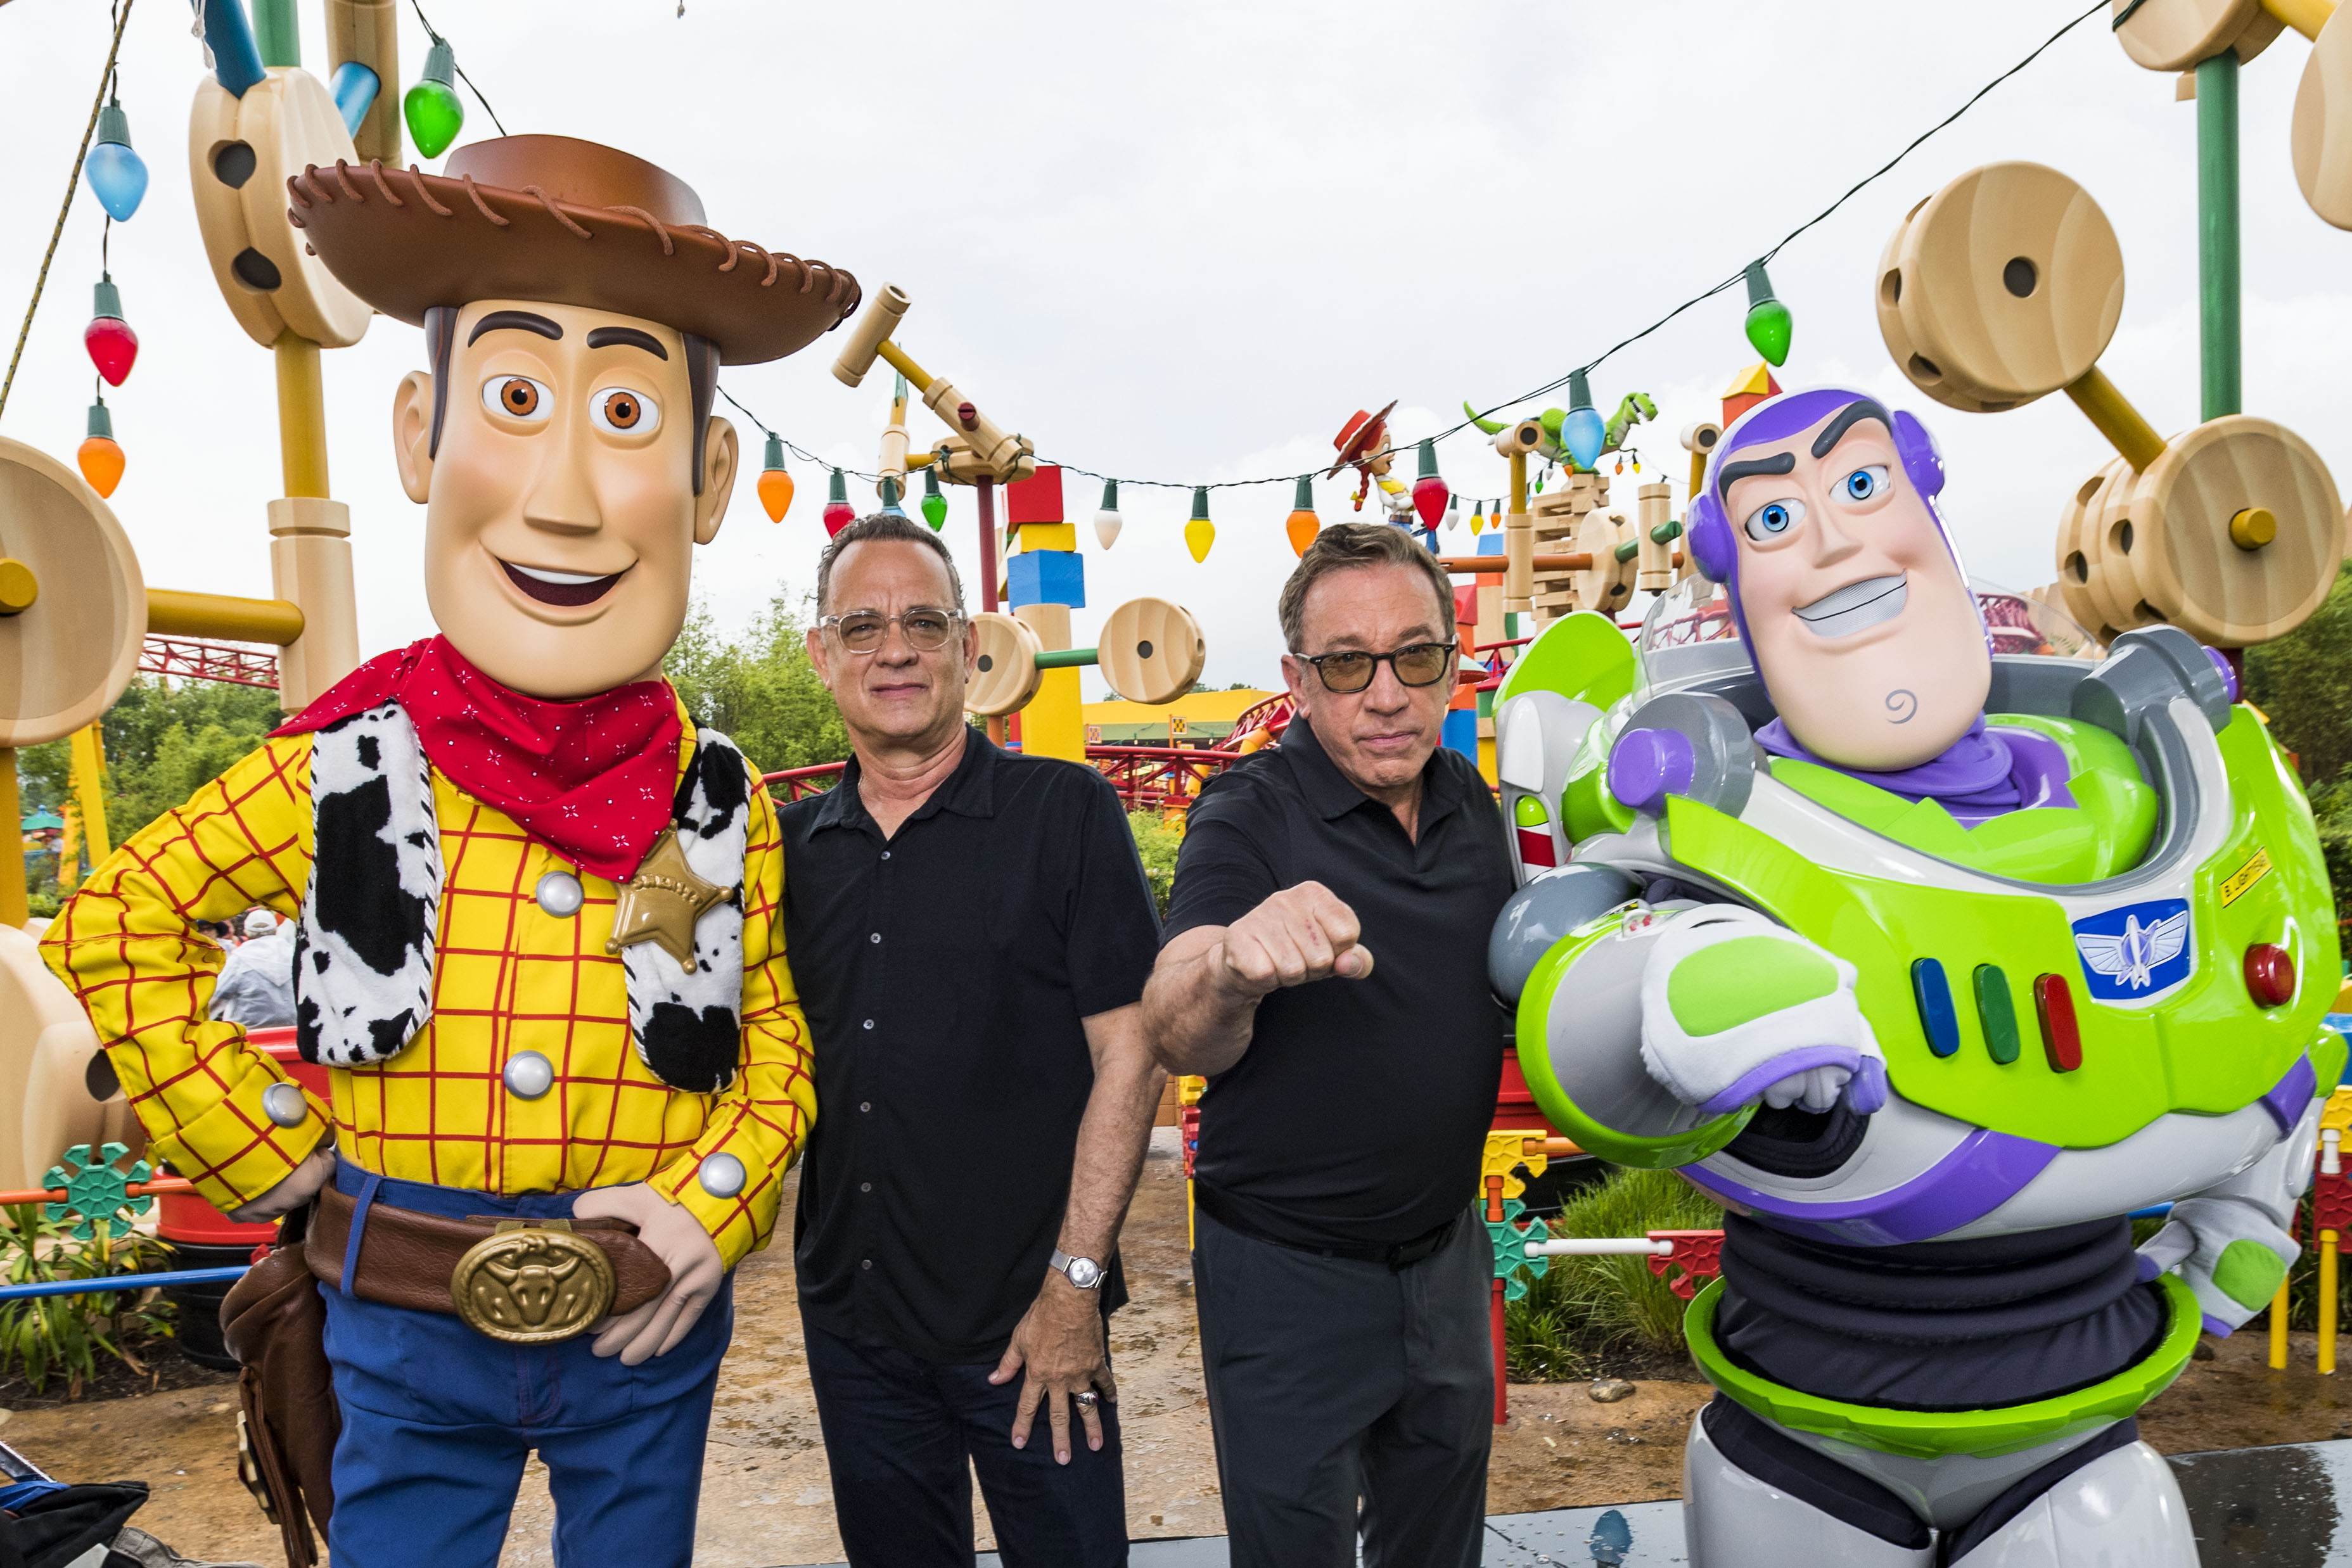 Tom Hanks and Tim Allen pose with Woody and Buzz Lightyear at Toy Story Land in Disney's Hollywood Studios in Florida